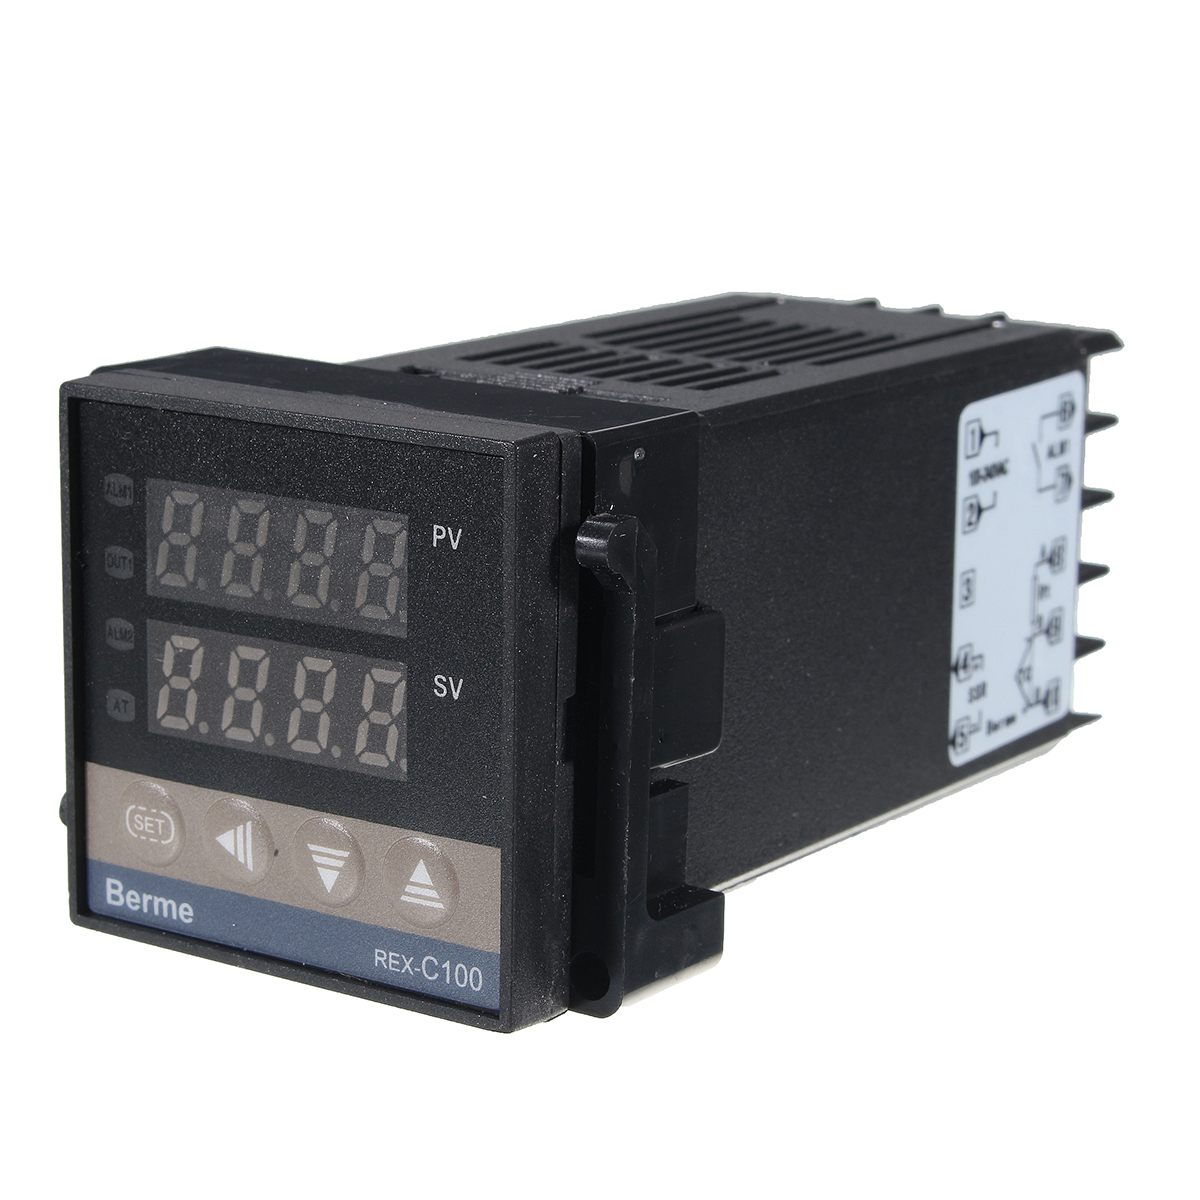 110-240V-01300-REX-C100-Digital-PID-Temperature-Controller-Kit-Alarm-Function-With-Probe-Relay-1351235-8